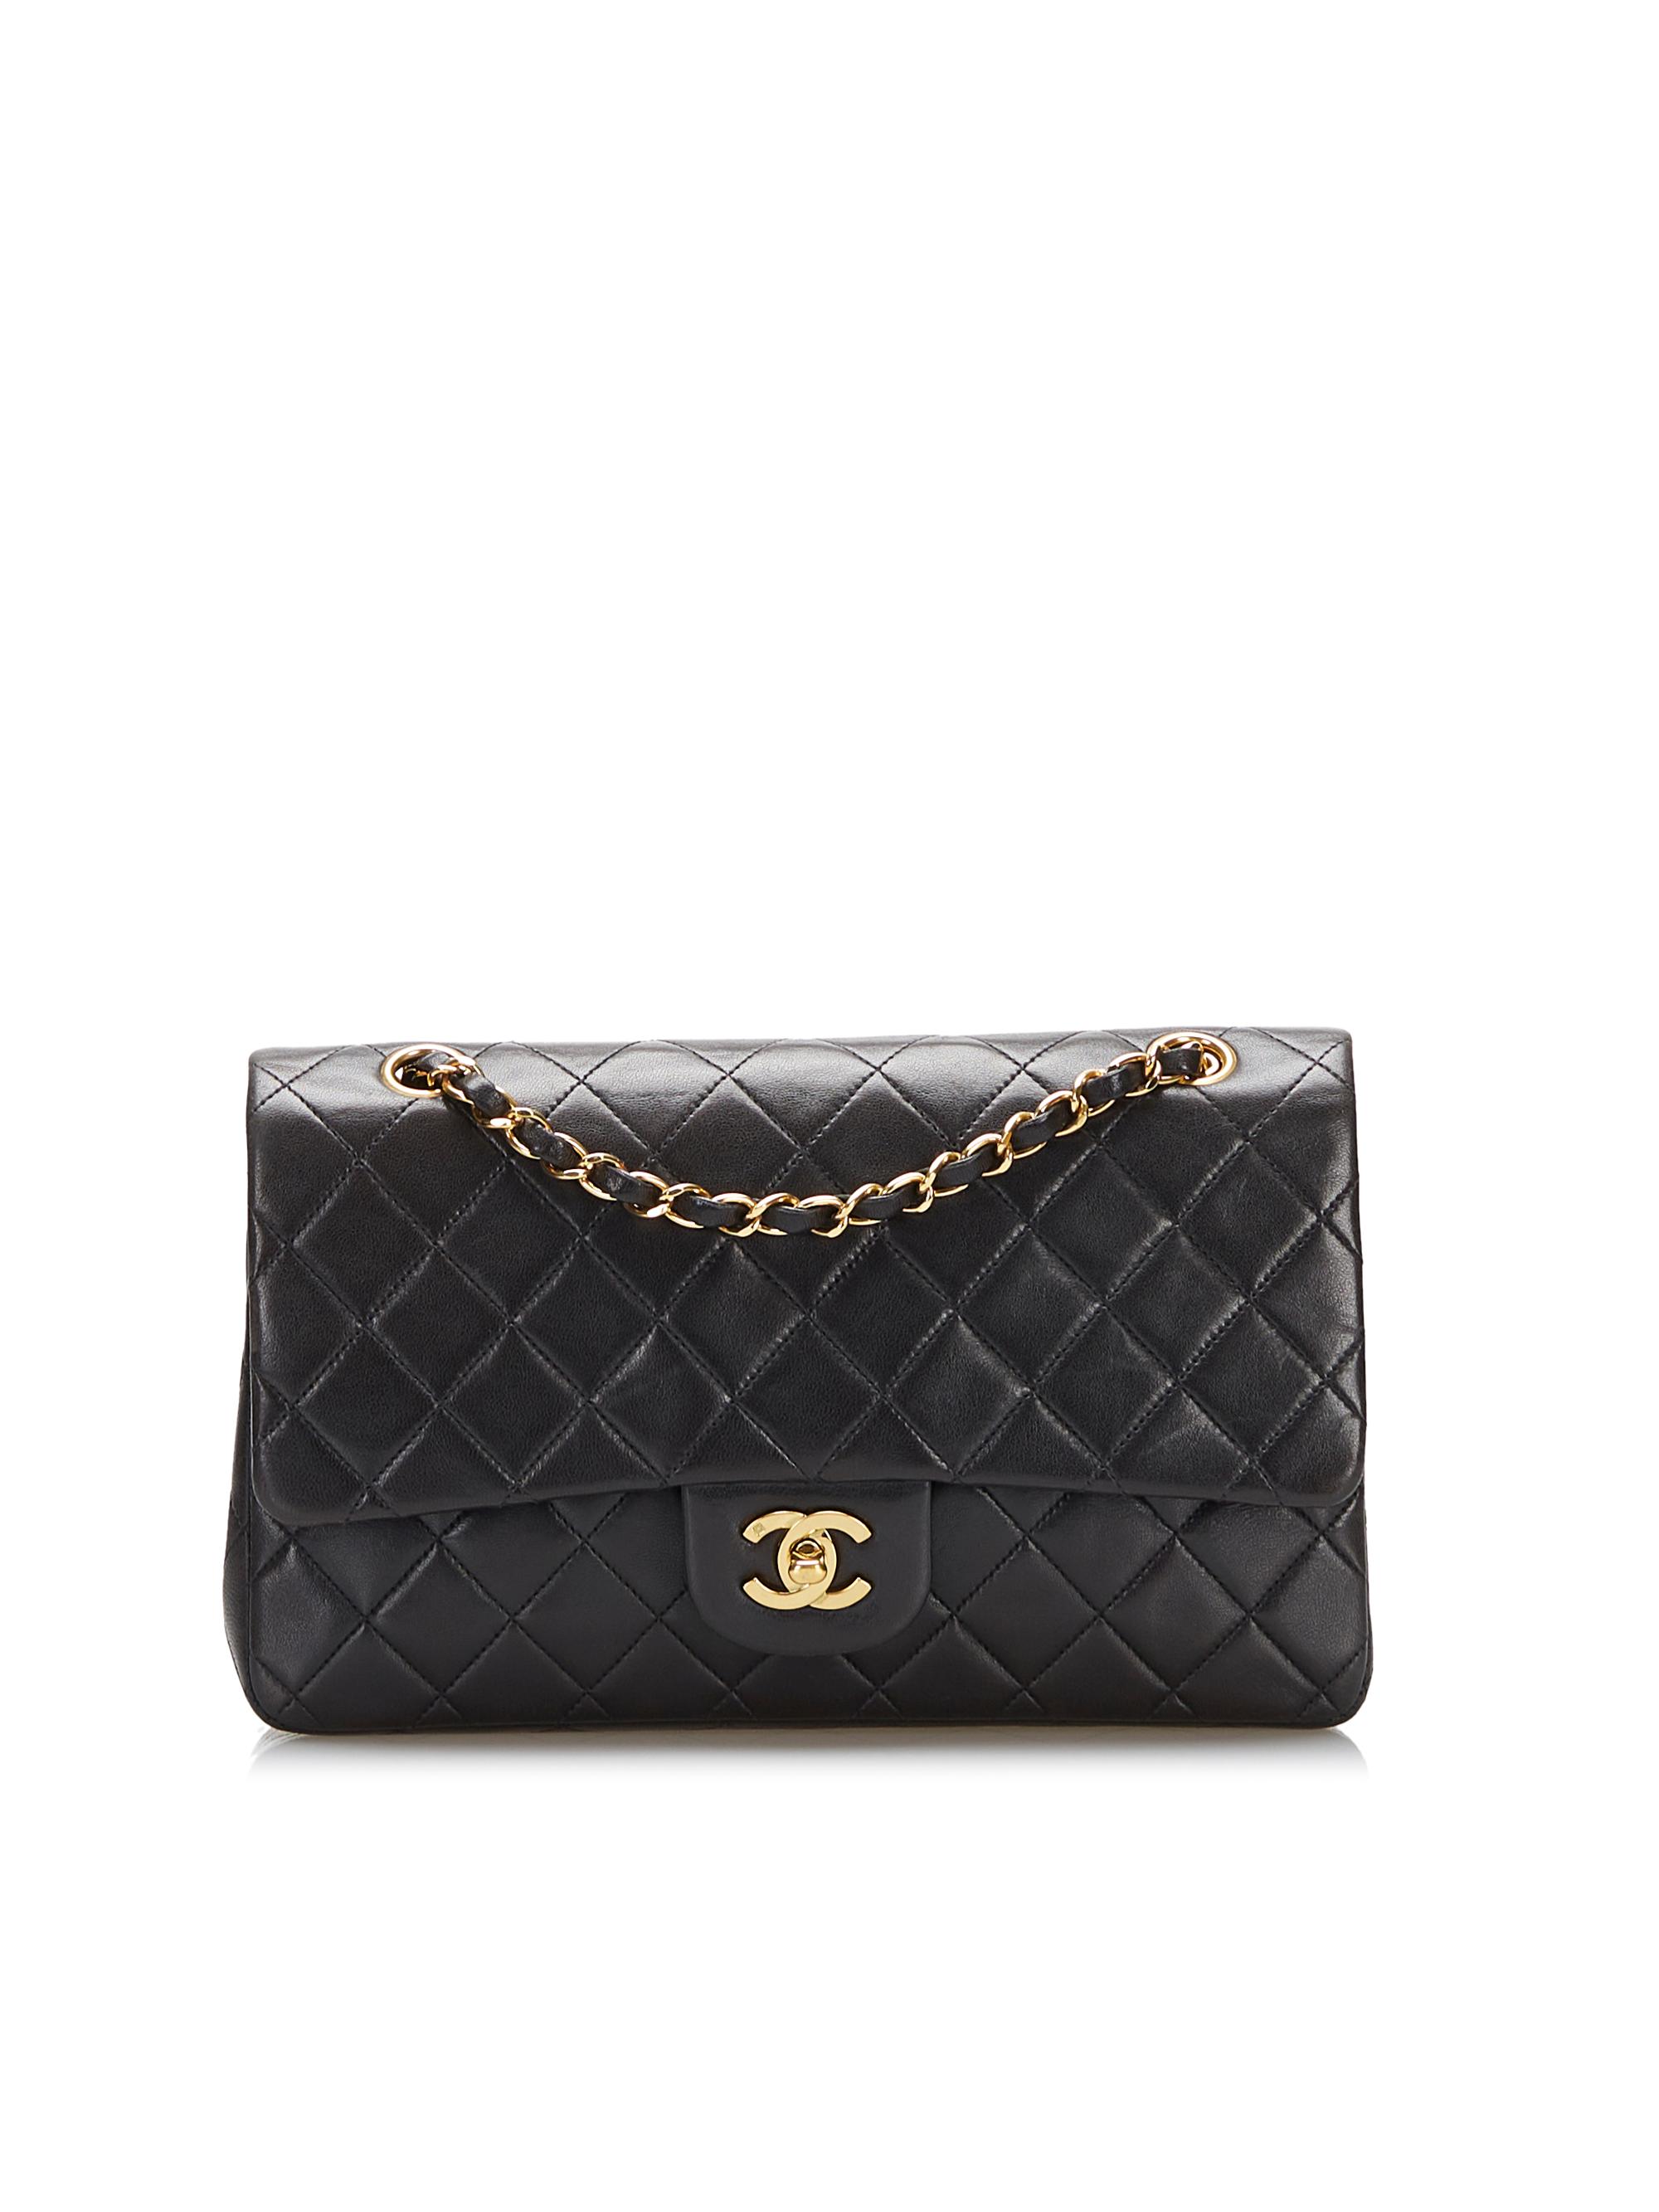 Chanel 100% Leather Black Medium Classic Lambskin Double Flap Bag One Size  - 37% off